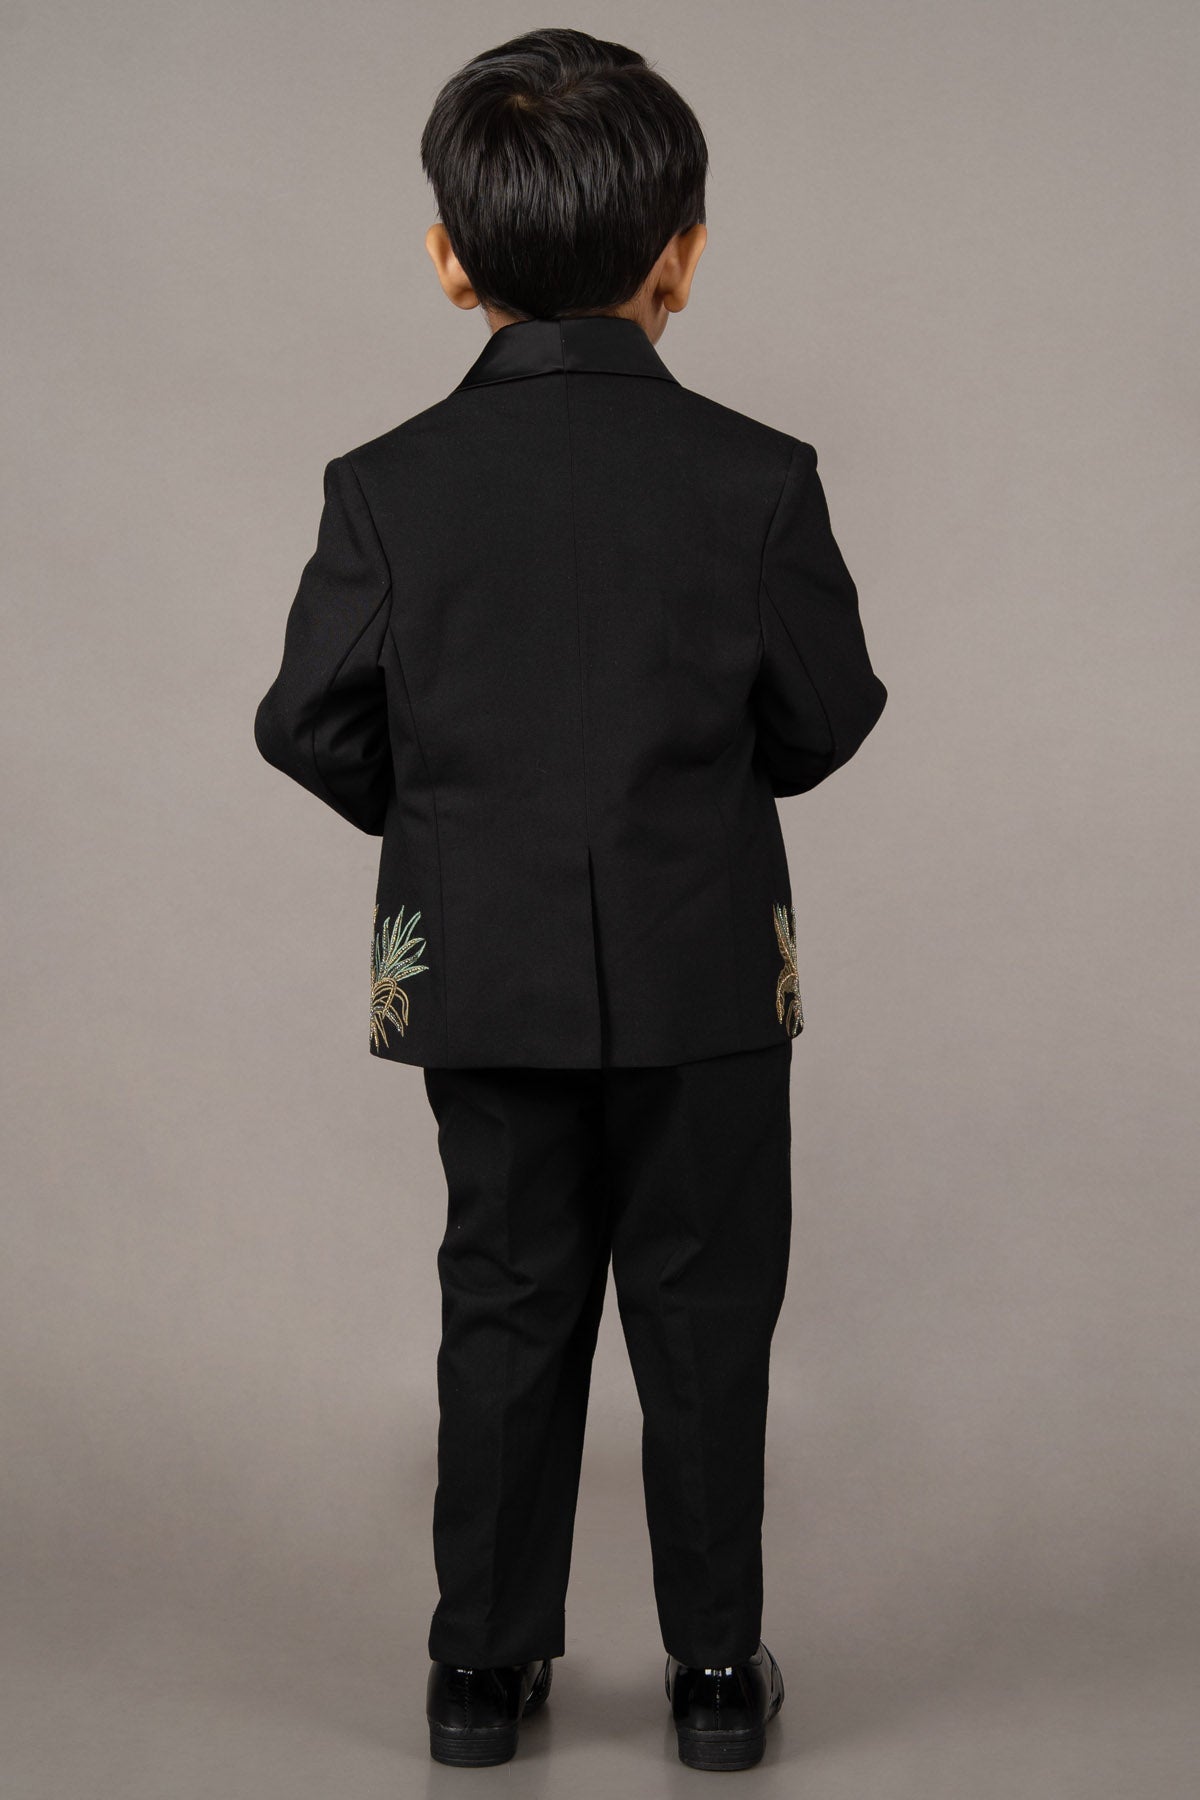 Black Cheetah Embroidered Suit